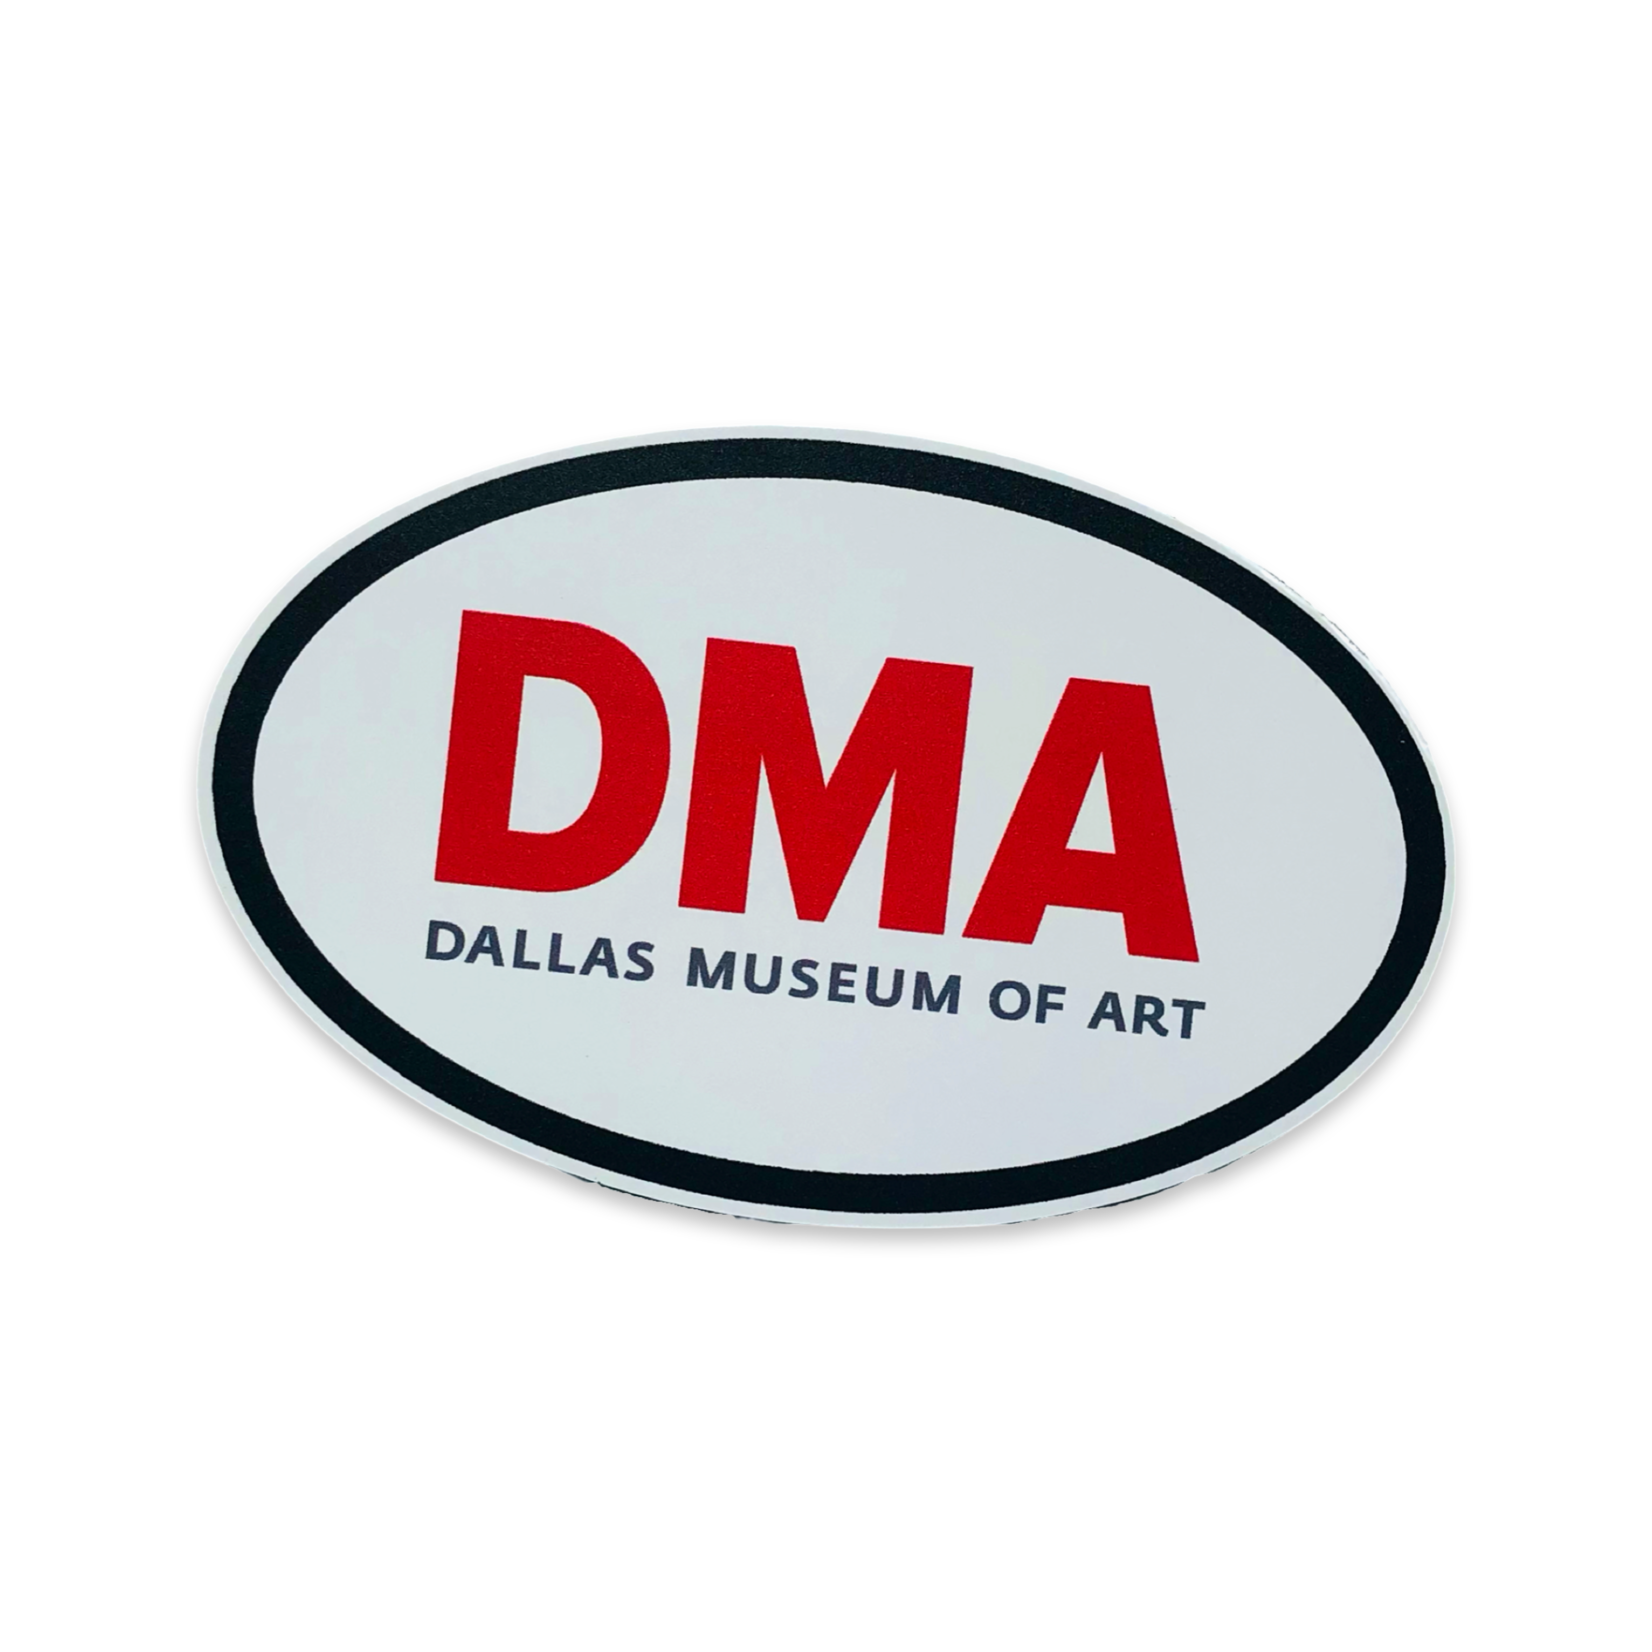 MUSEUM STORE PRODUCTS DMA LOGO CAR MAGNET